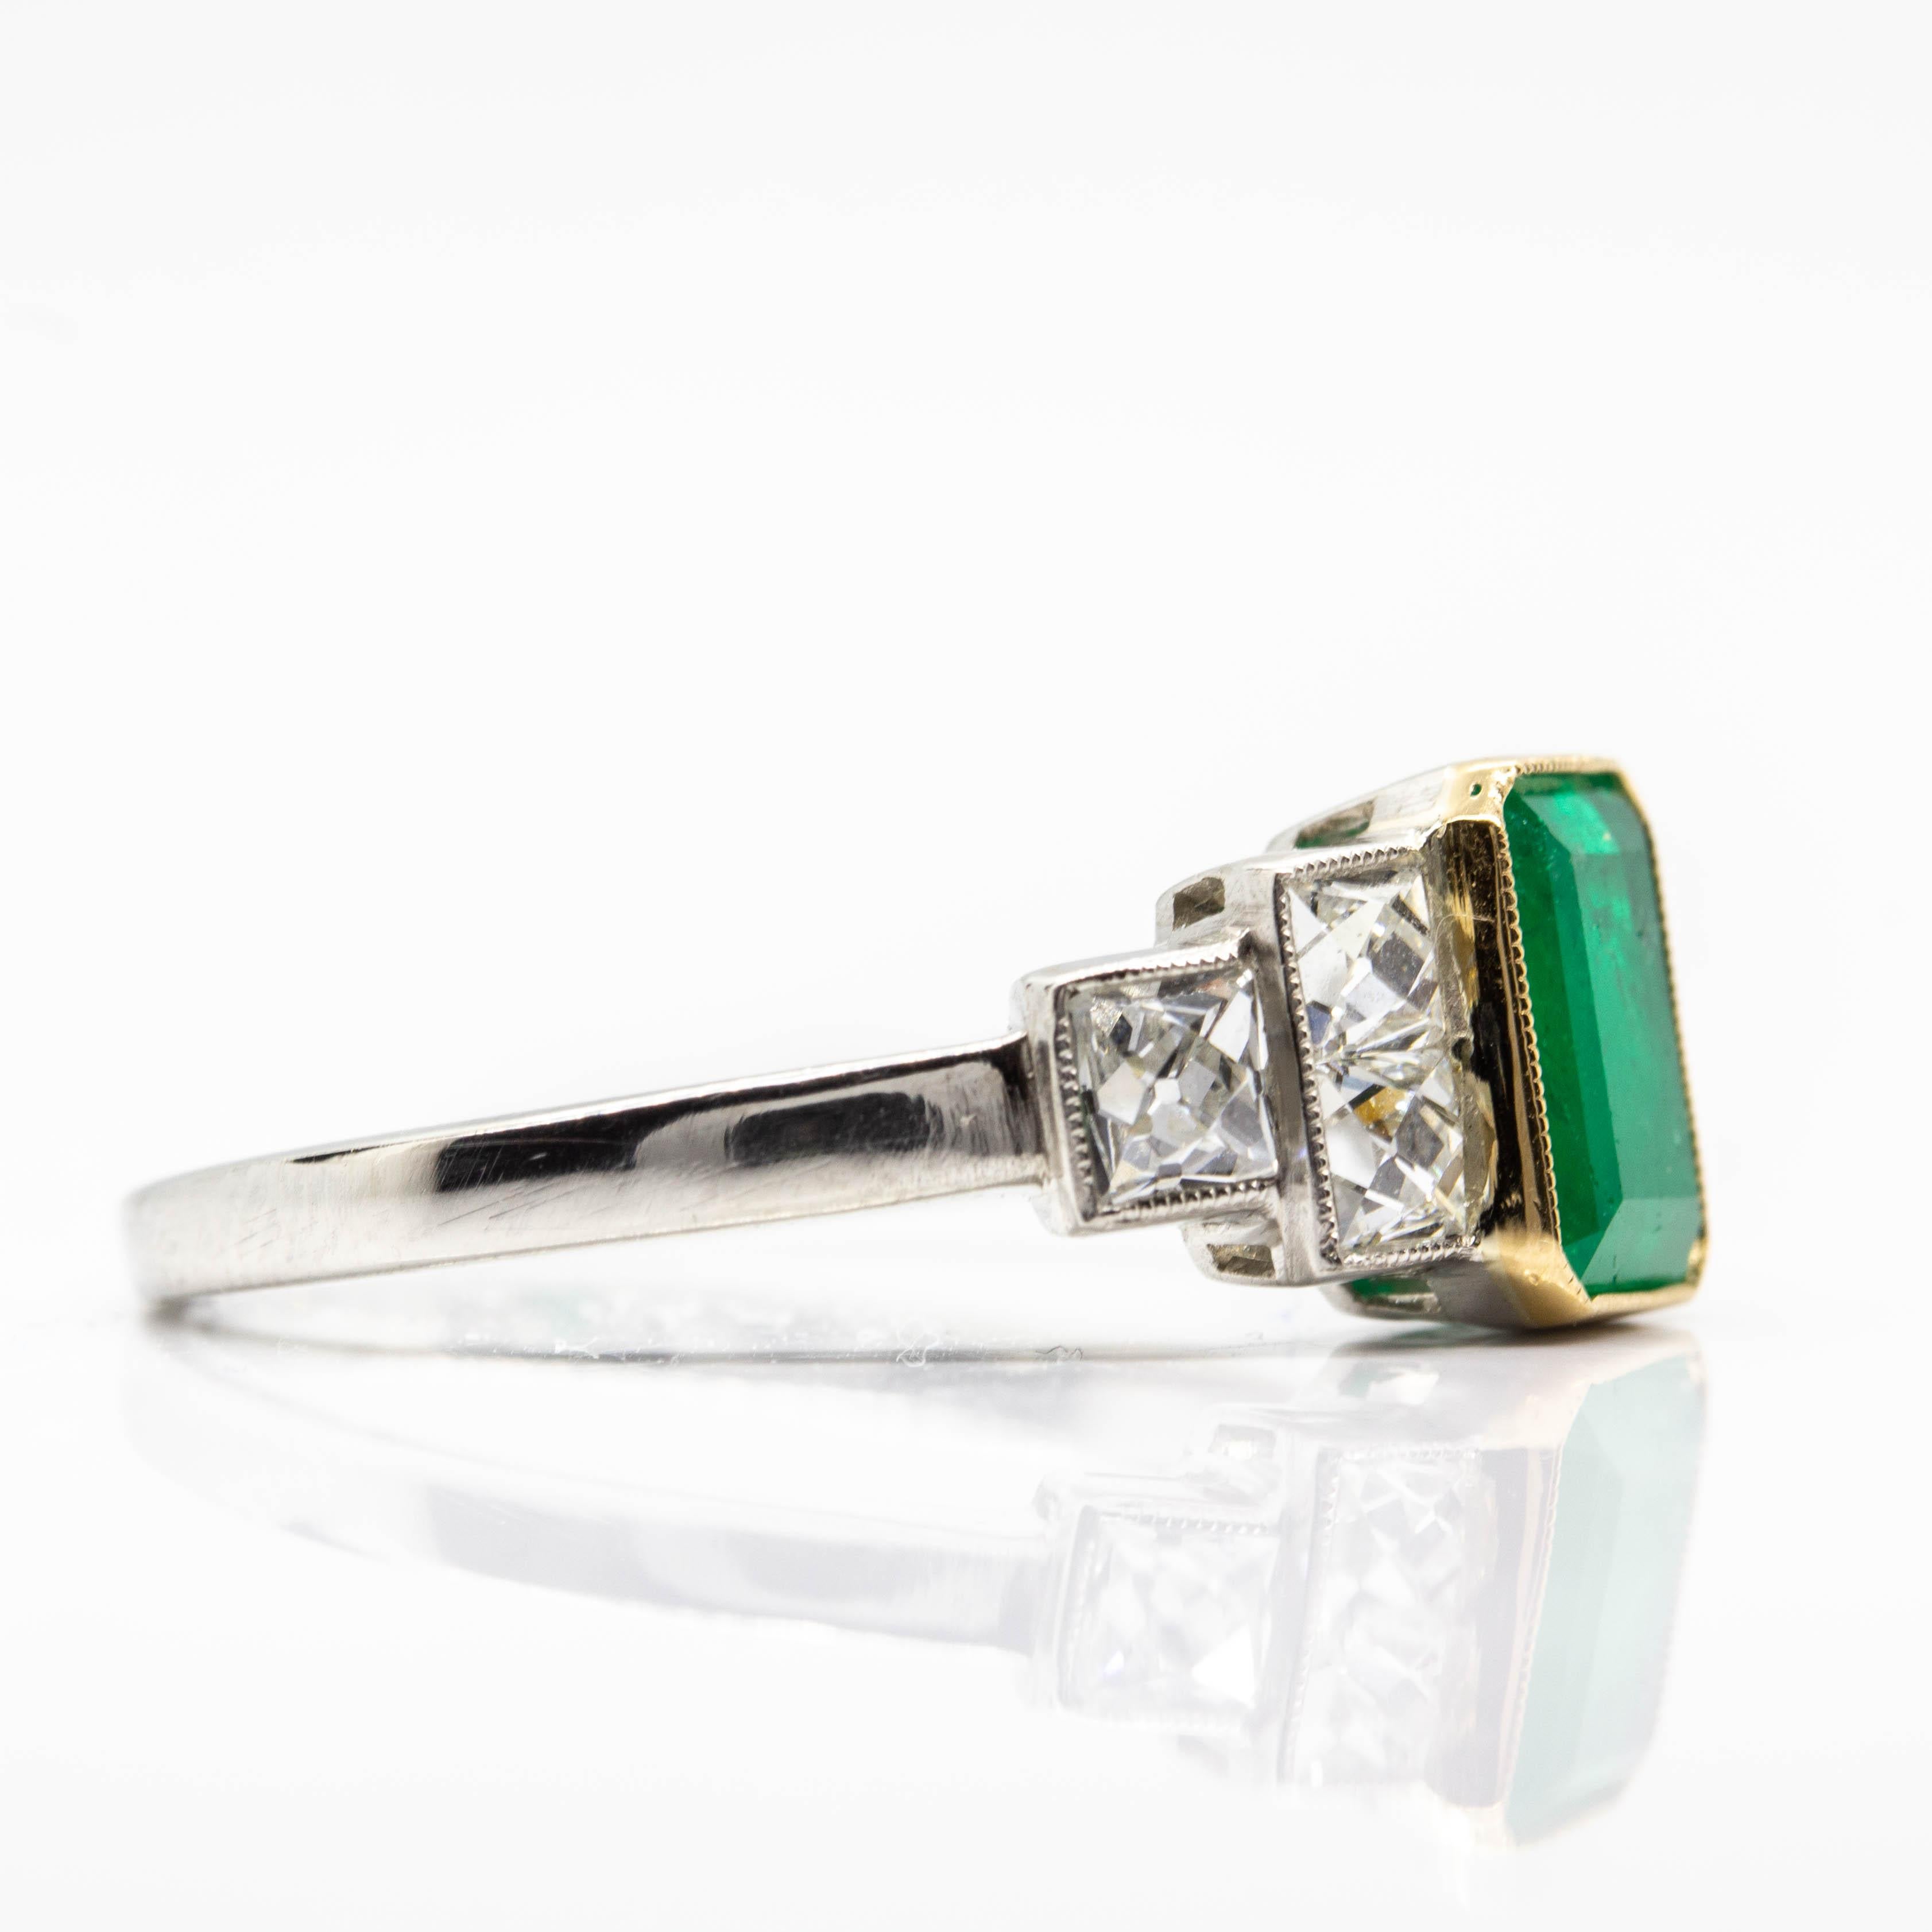 Composition: Platinum 
•	1 natural Colombian emerald 1.25ctw.
•	6 French cut diamonds H-VS1 0.90ctw.
Ring size: 7 ½ 
Ring face measure: 8mm x 15mm 
Rise above finger: 5mm
Total weight: 4.2 grams – 2.7dwt
